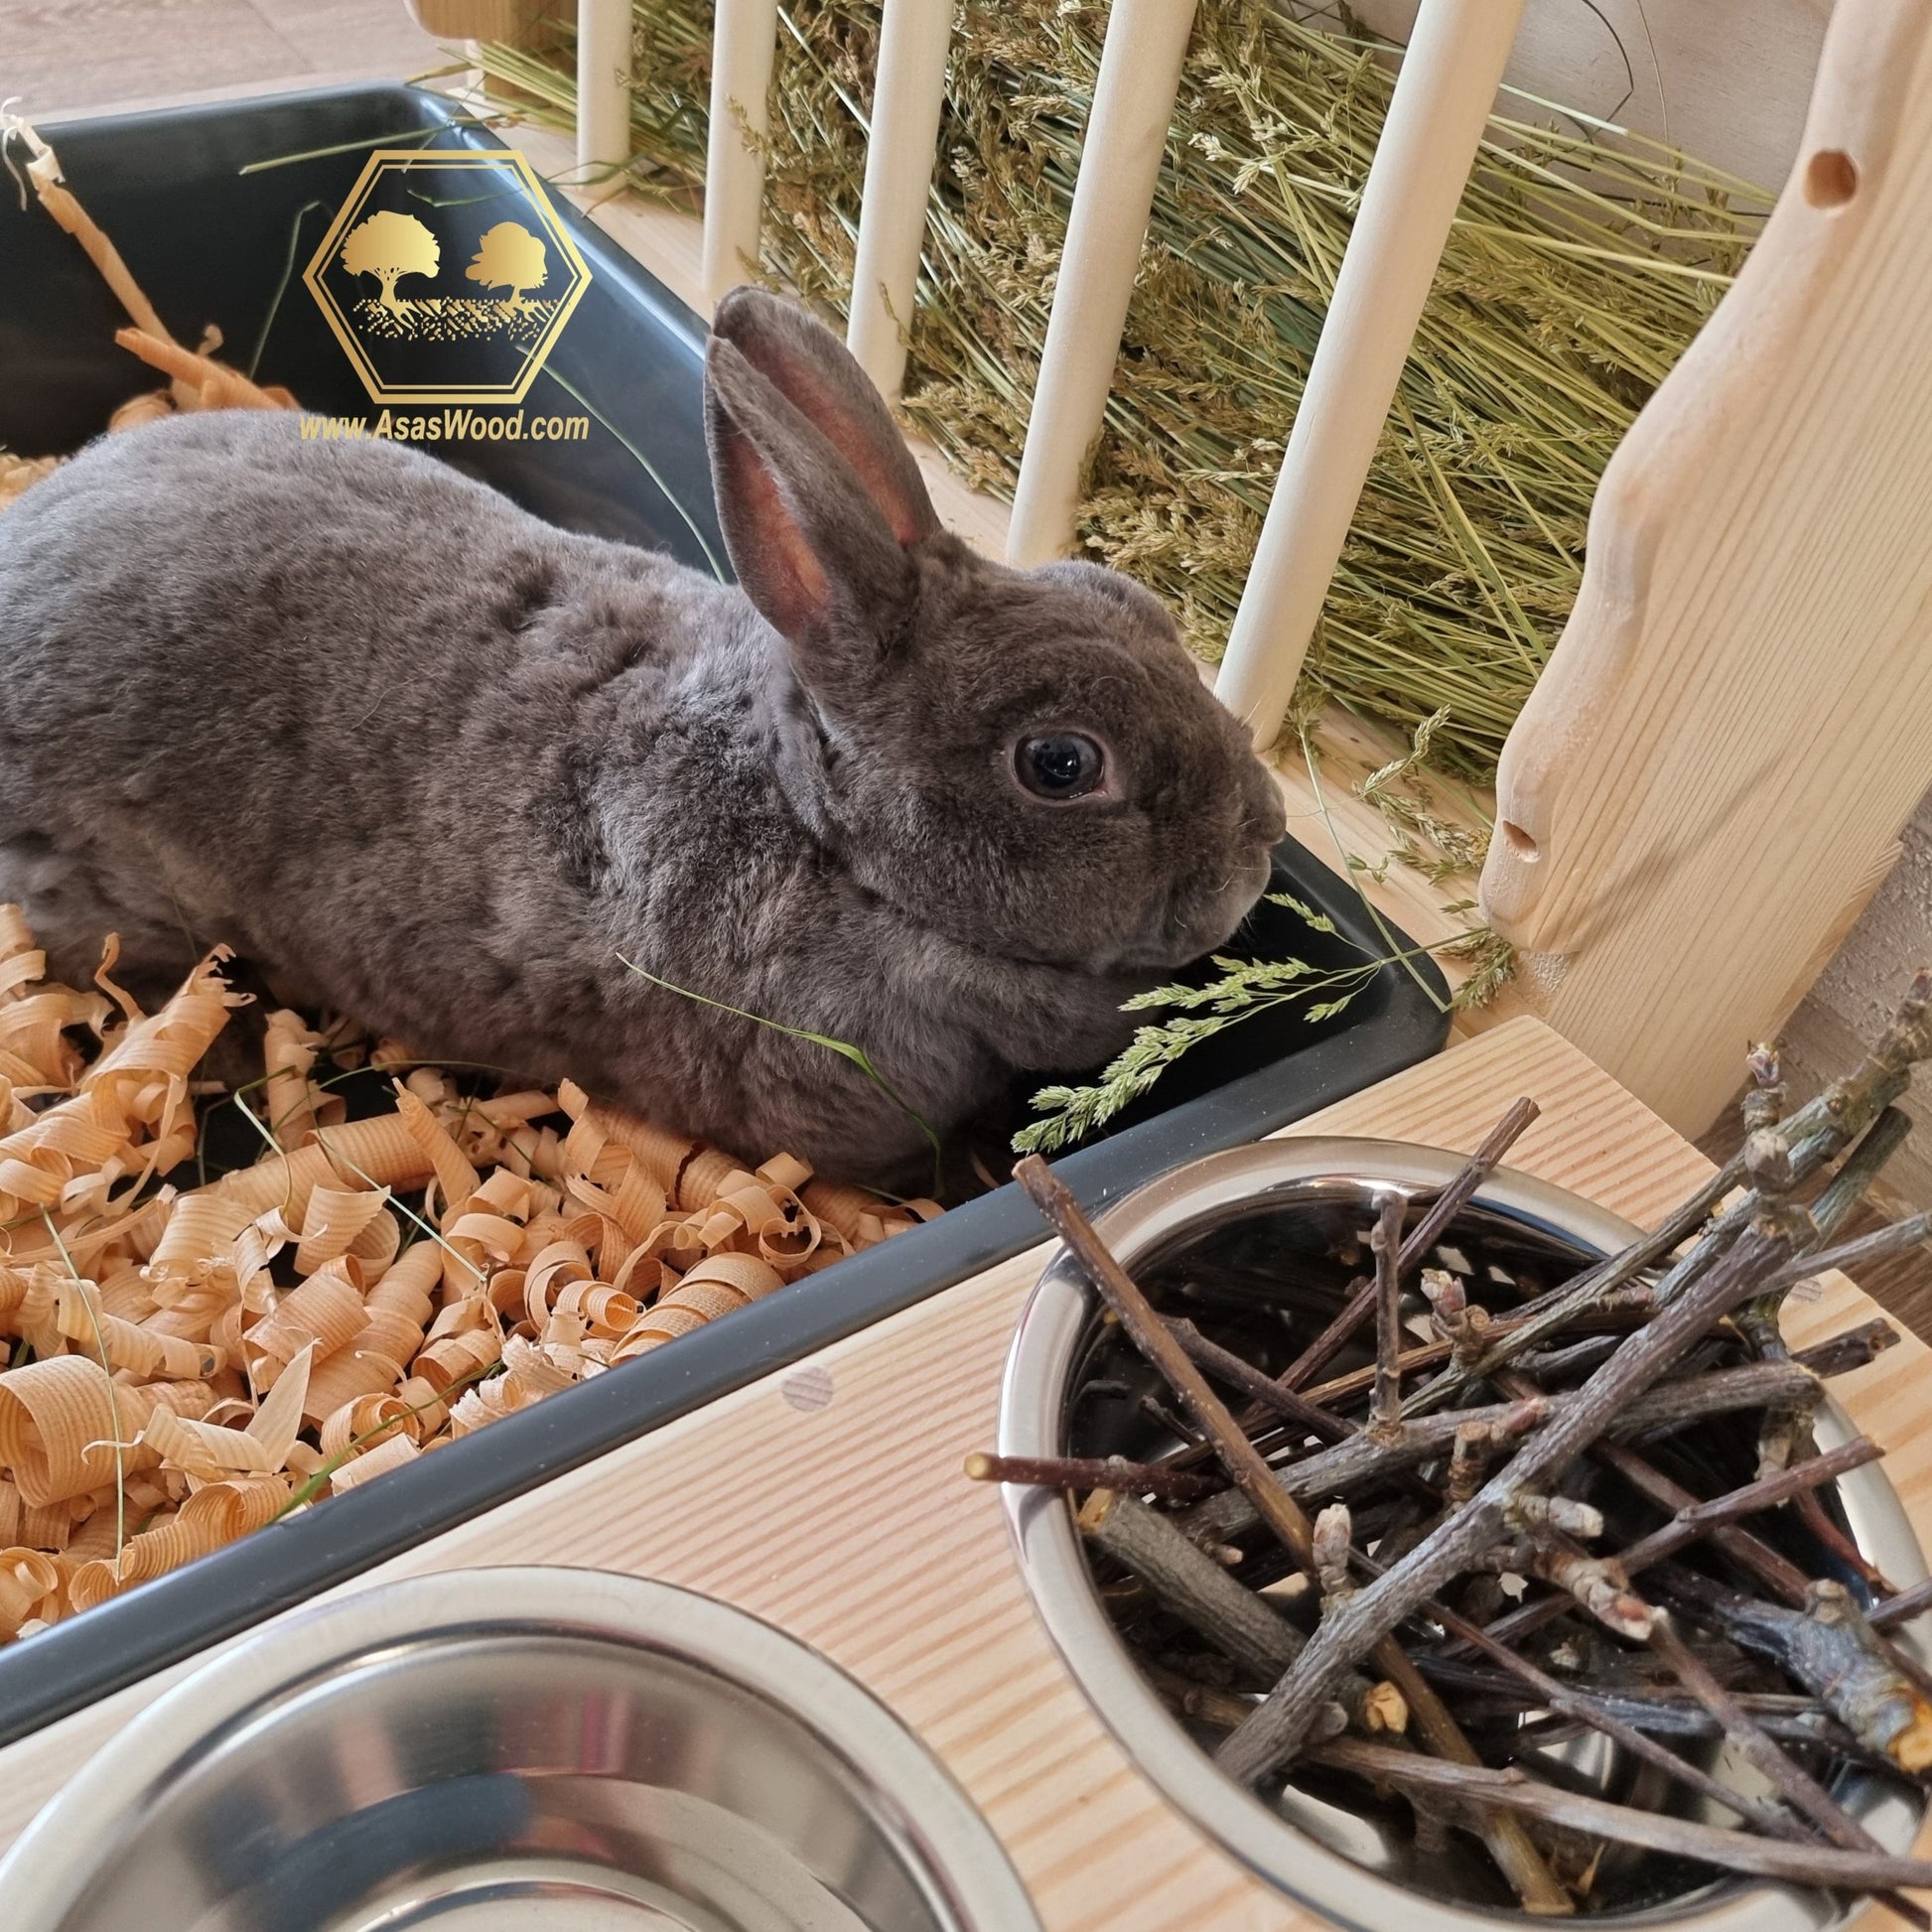 beautiful blue bunny rabbit inside rabbit litter box eating hay from wooden handmade hay feeder. Food bowl is full of apple tree chew sticks to chew.